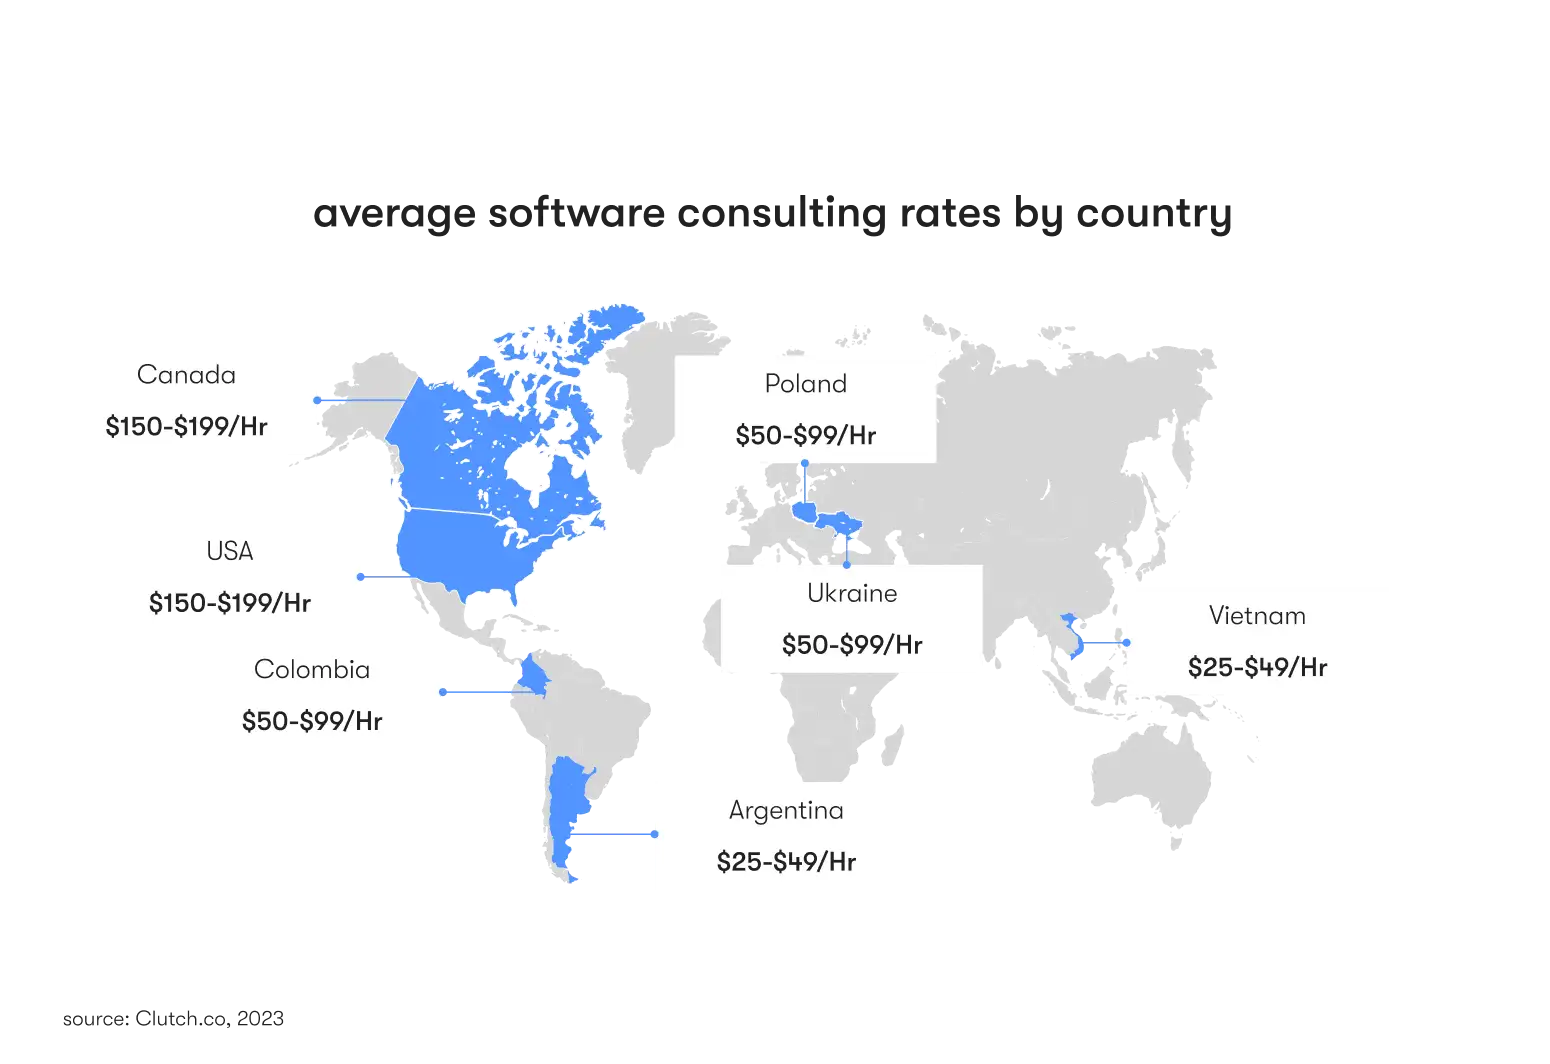 average software consultant hourly rates by country, 2023